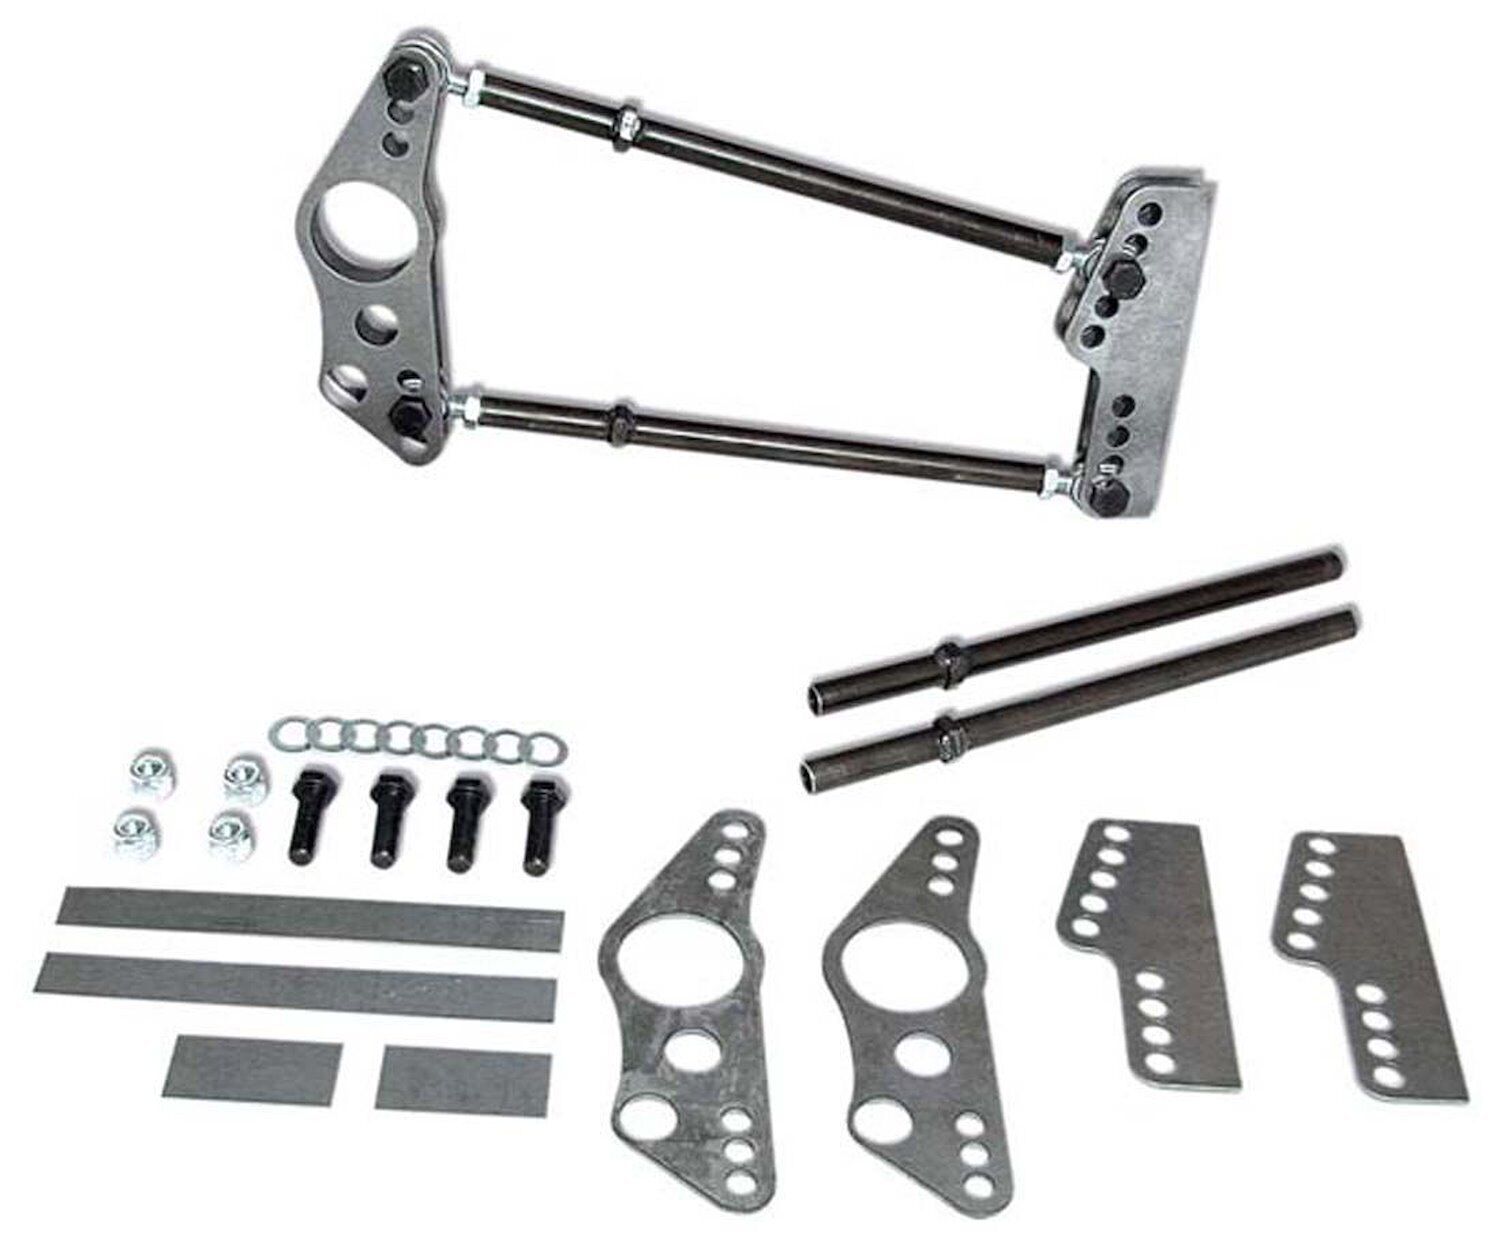 Competition Engineering 2017 Standard 4-Link Kit